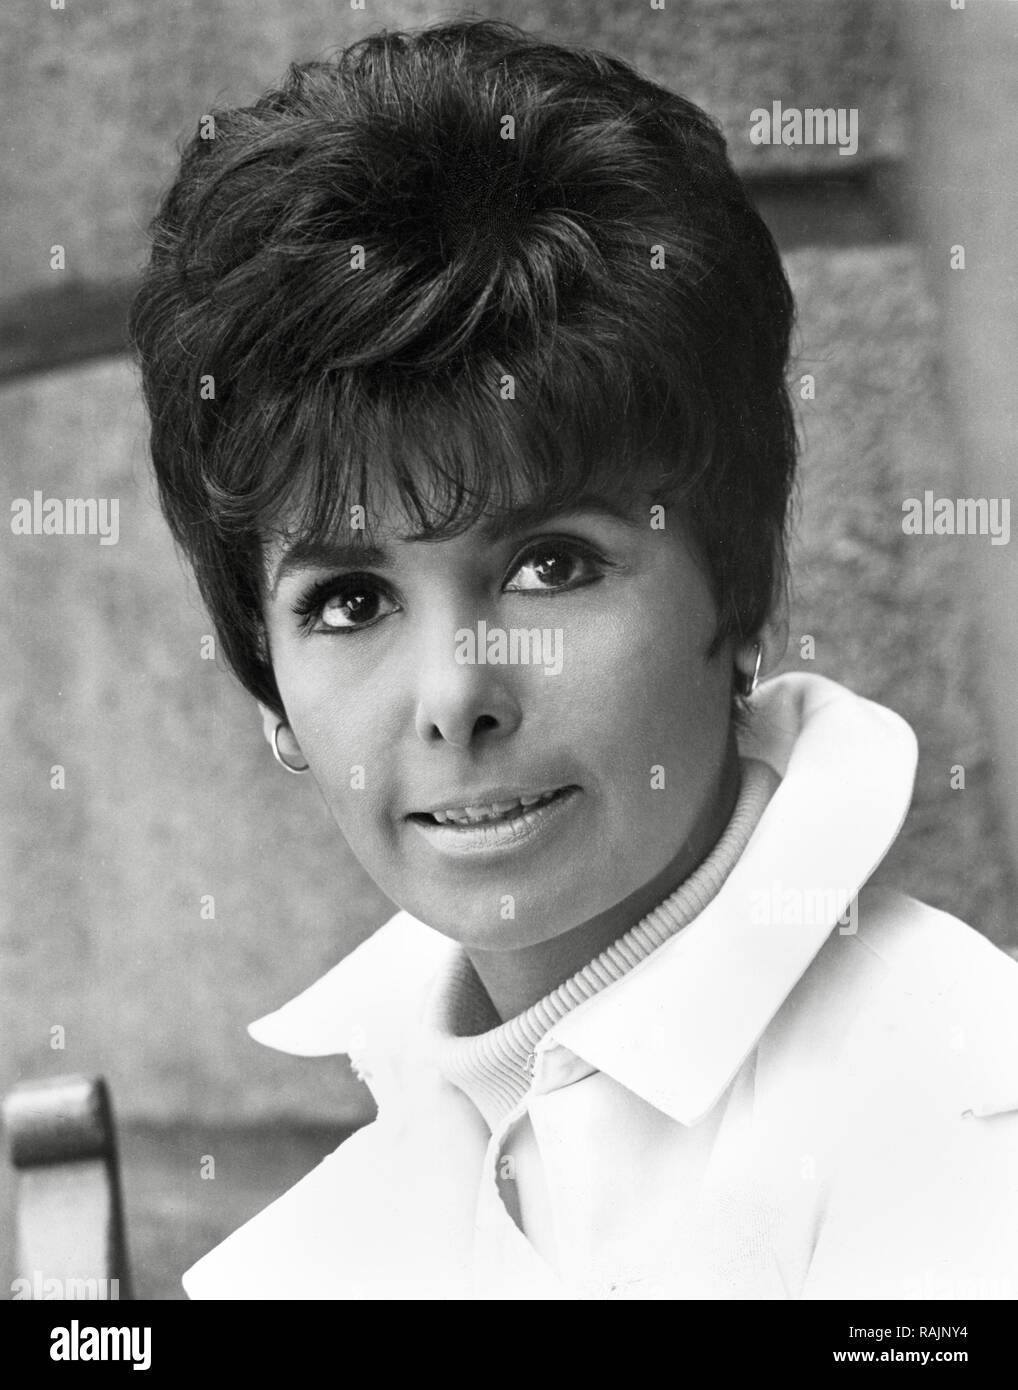 Publicity photo of Lena Horne,  1969  File Reference # 33636 951THA Stock Photo